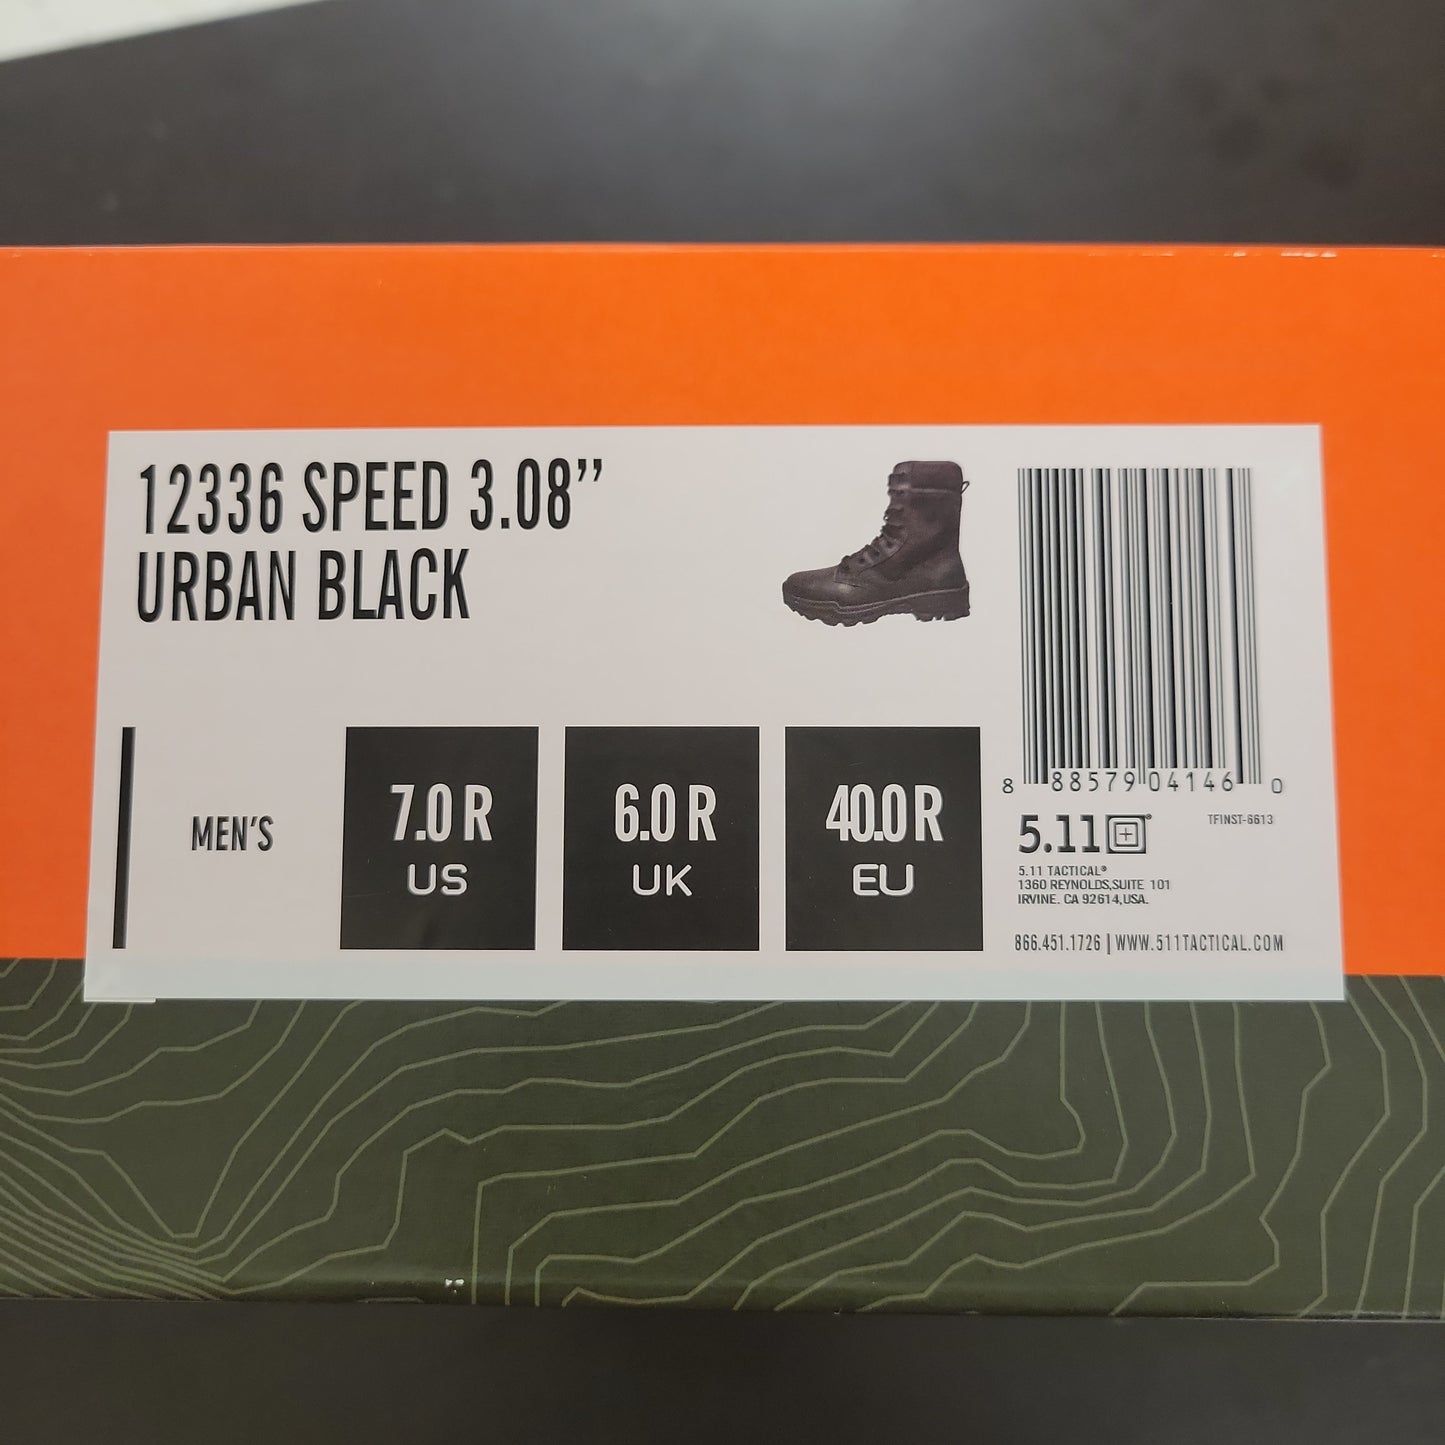 5.11 Tactical Boots Speed 3.0 Urban Black 7.0M 12336-019-7-R